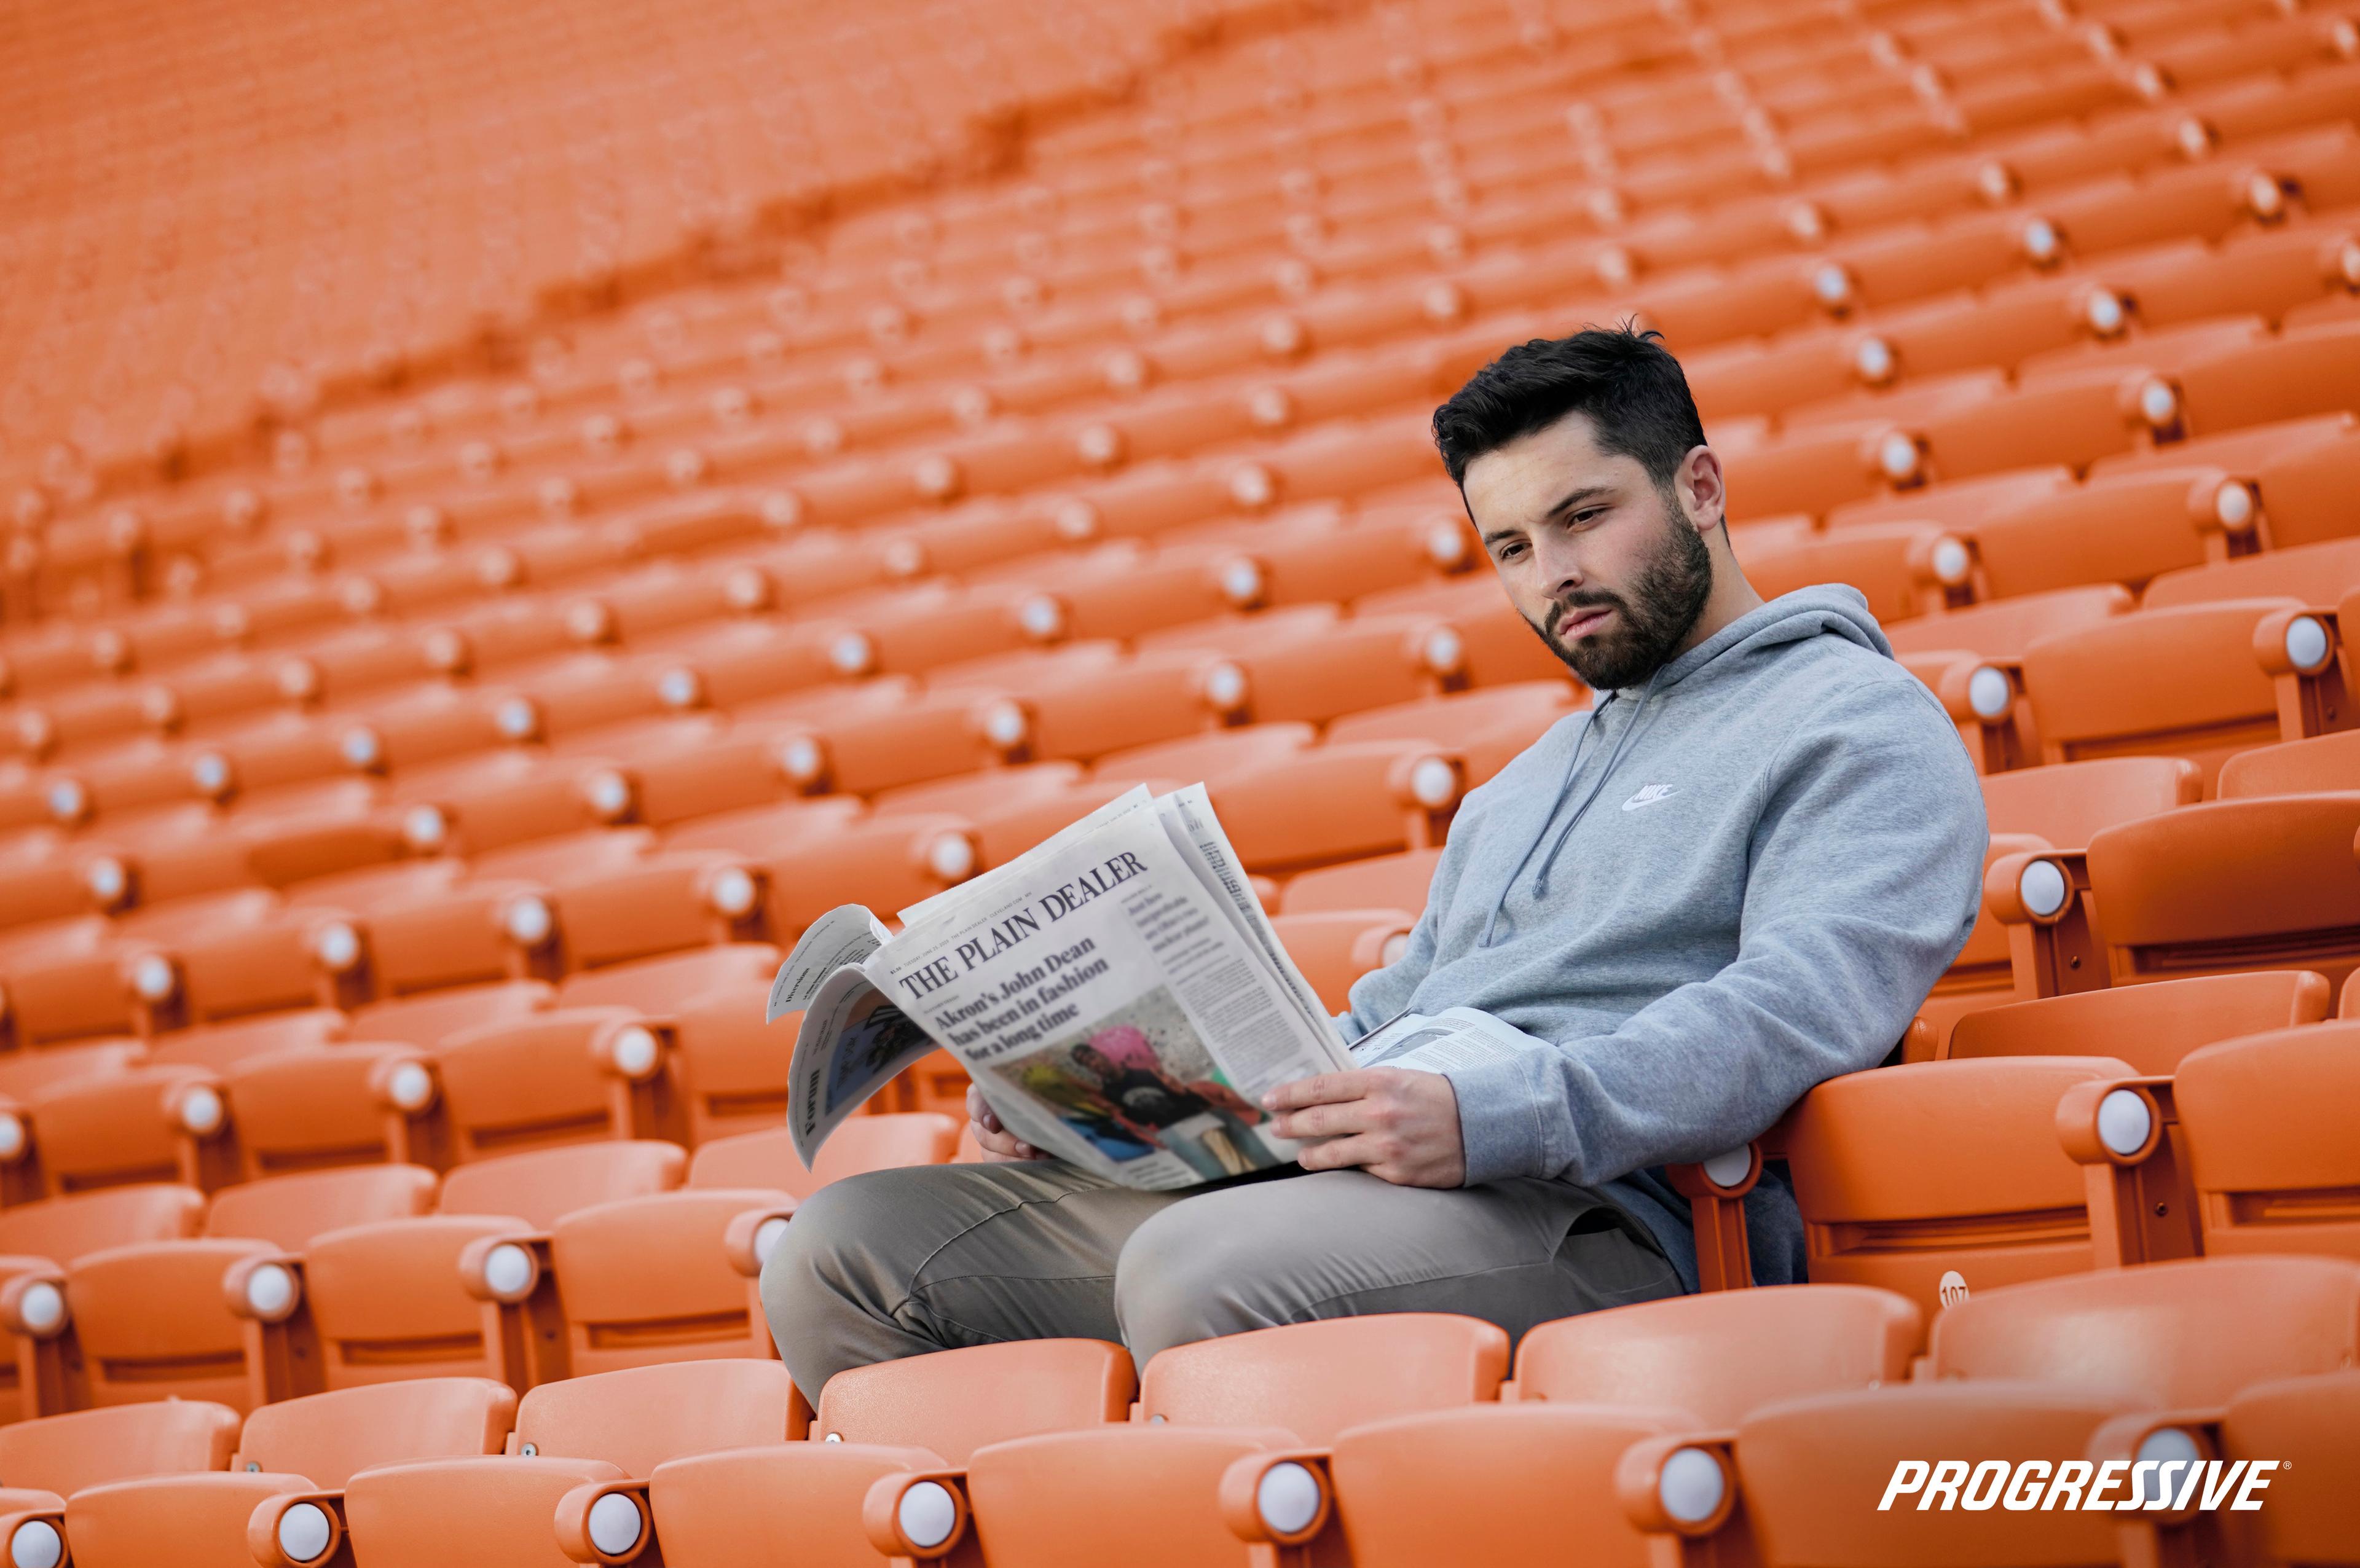 Progressive’s ‘At Home with Baker Mayfield’ commercials have been a hit.